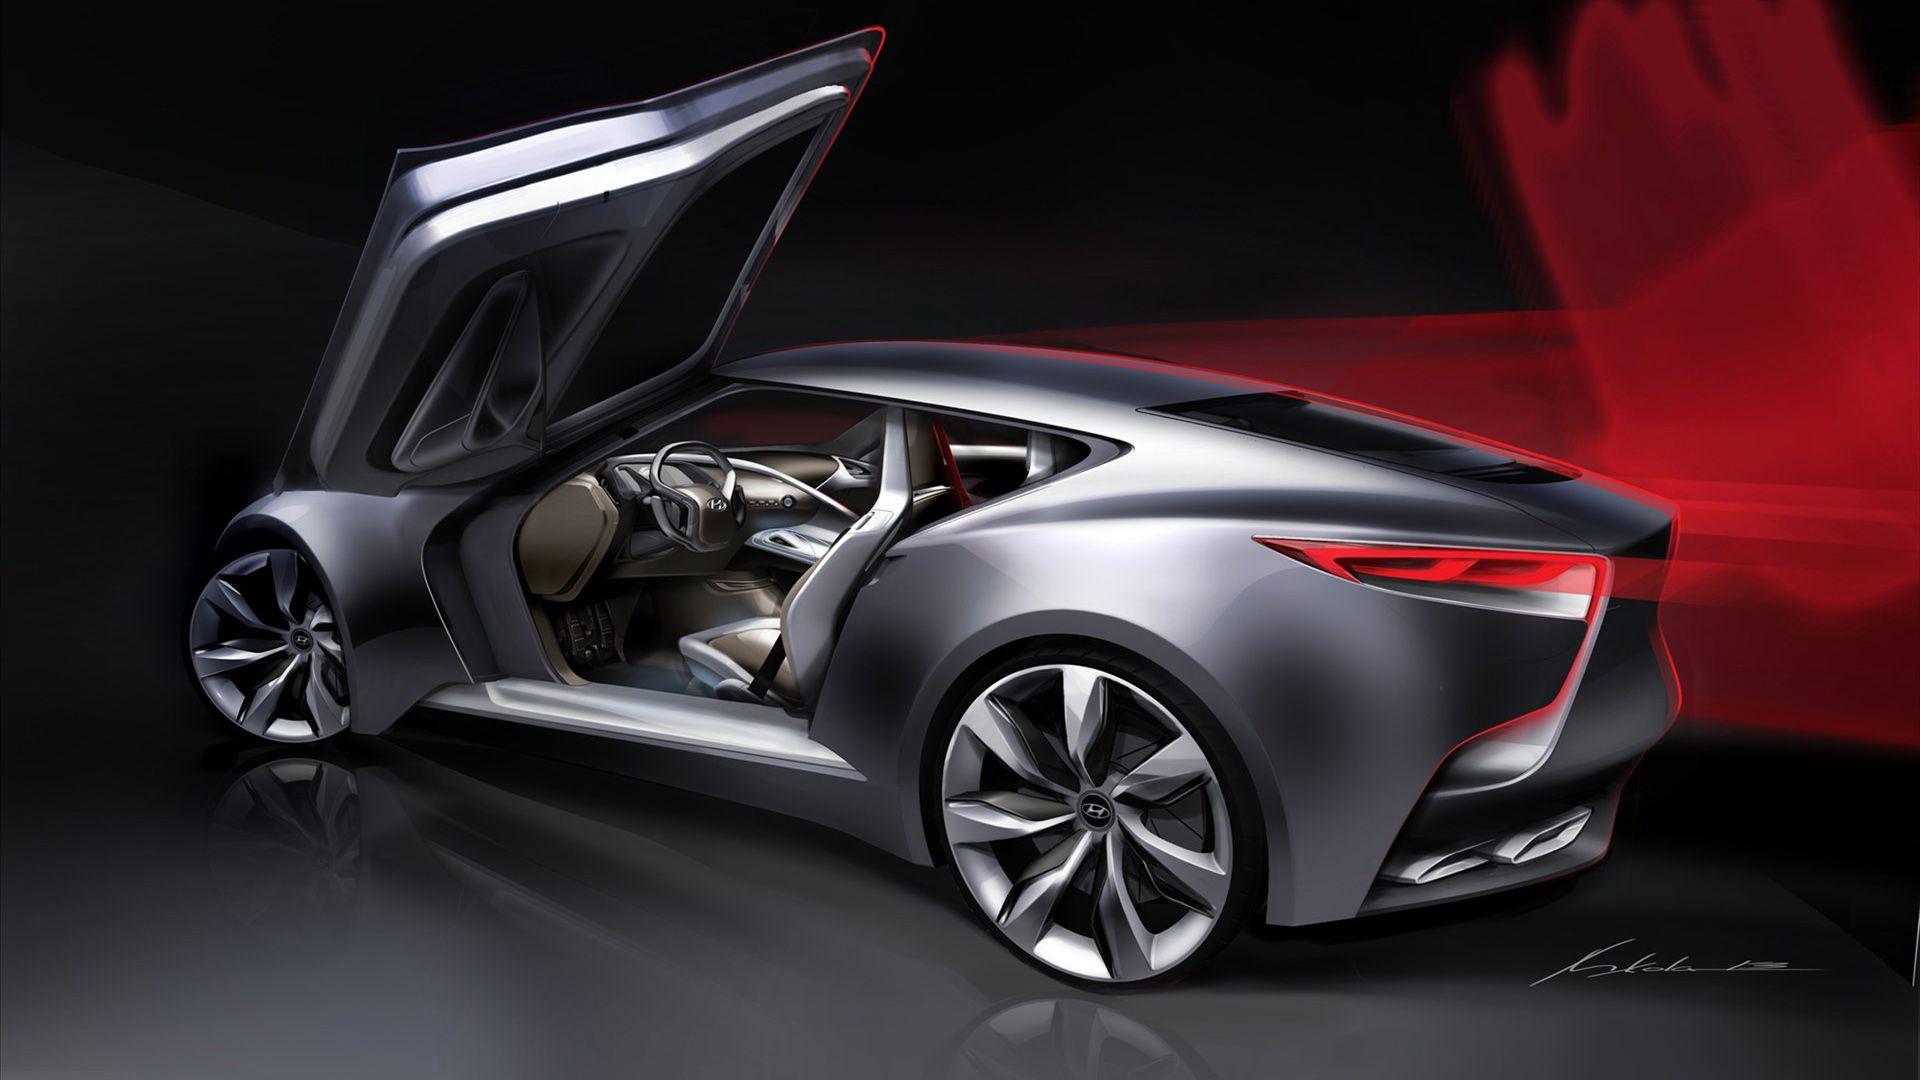 Click here to download in HD Format >> 2013 Hyundai Hnd 9 Concept